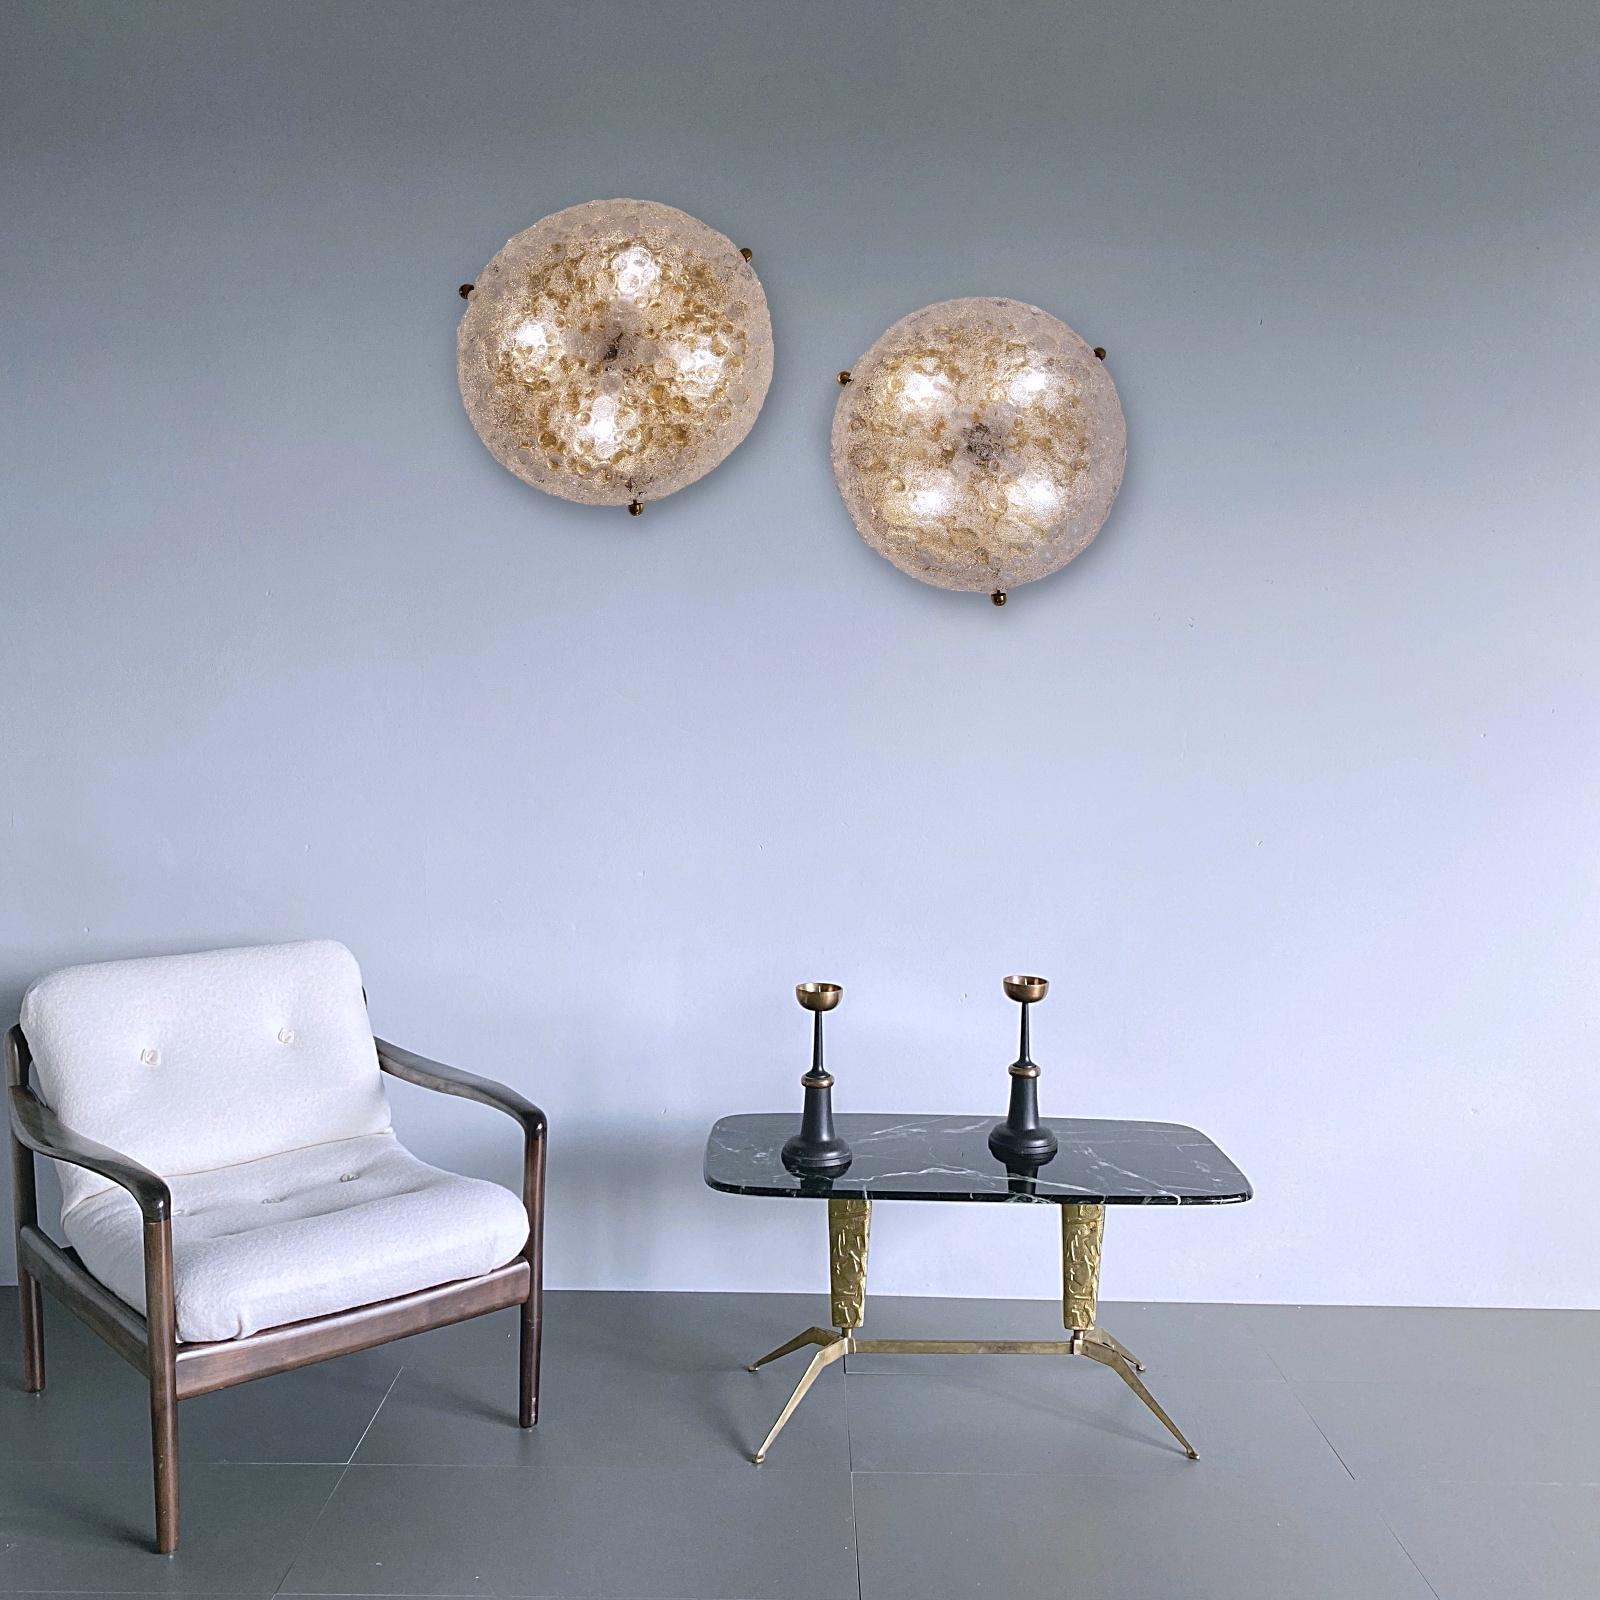 Iconic midcentury lamp made by Leuchtfabrik Hillebrand in the late 1960s. It's featuring thick Murano bubble-textured glass and polished brass hardware. It's in excellent condition with four E14 porcelain sockets. It was one of the biggest flush